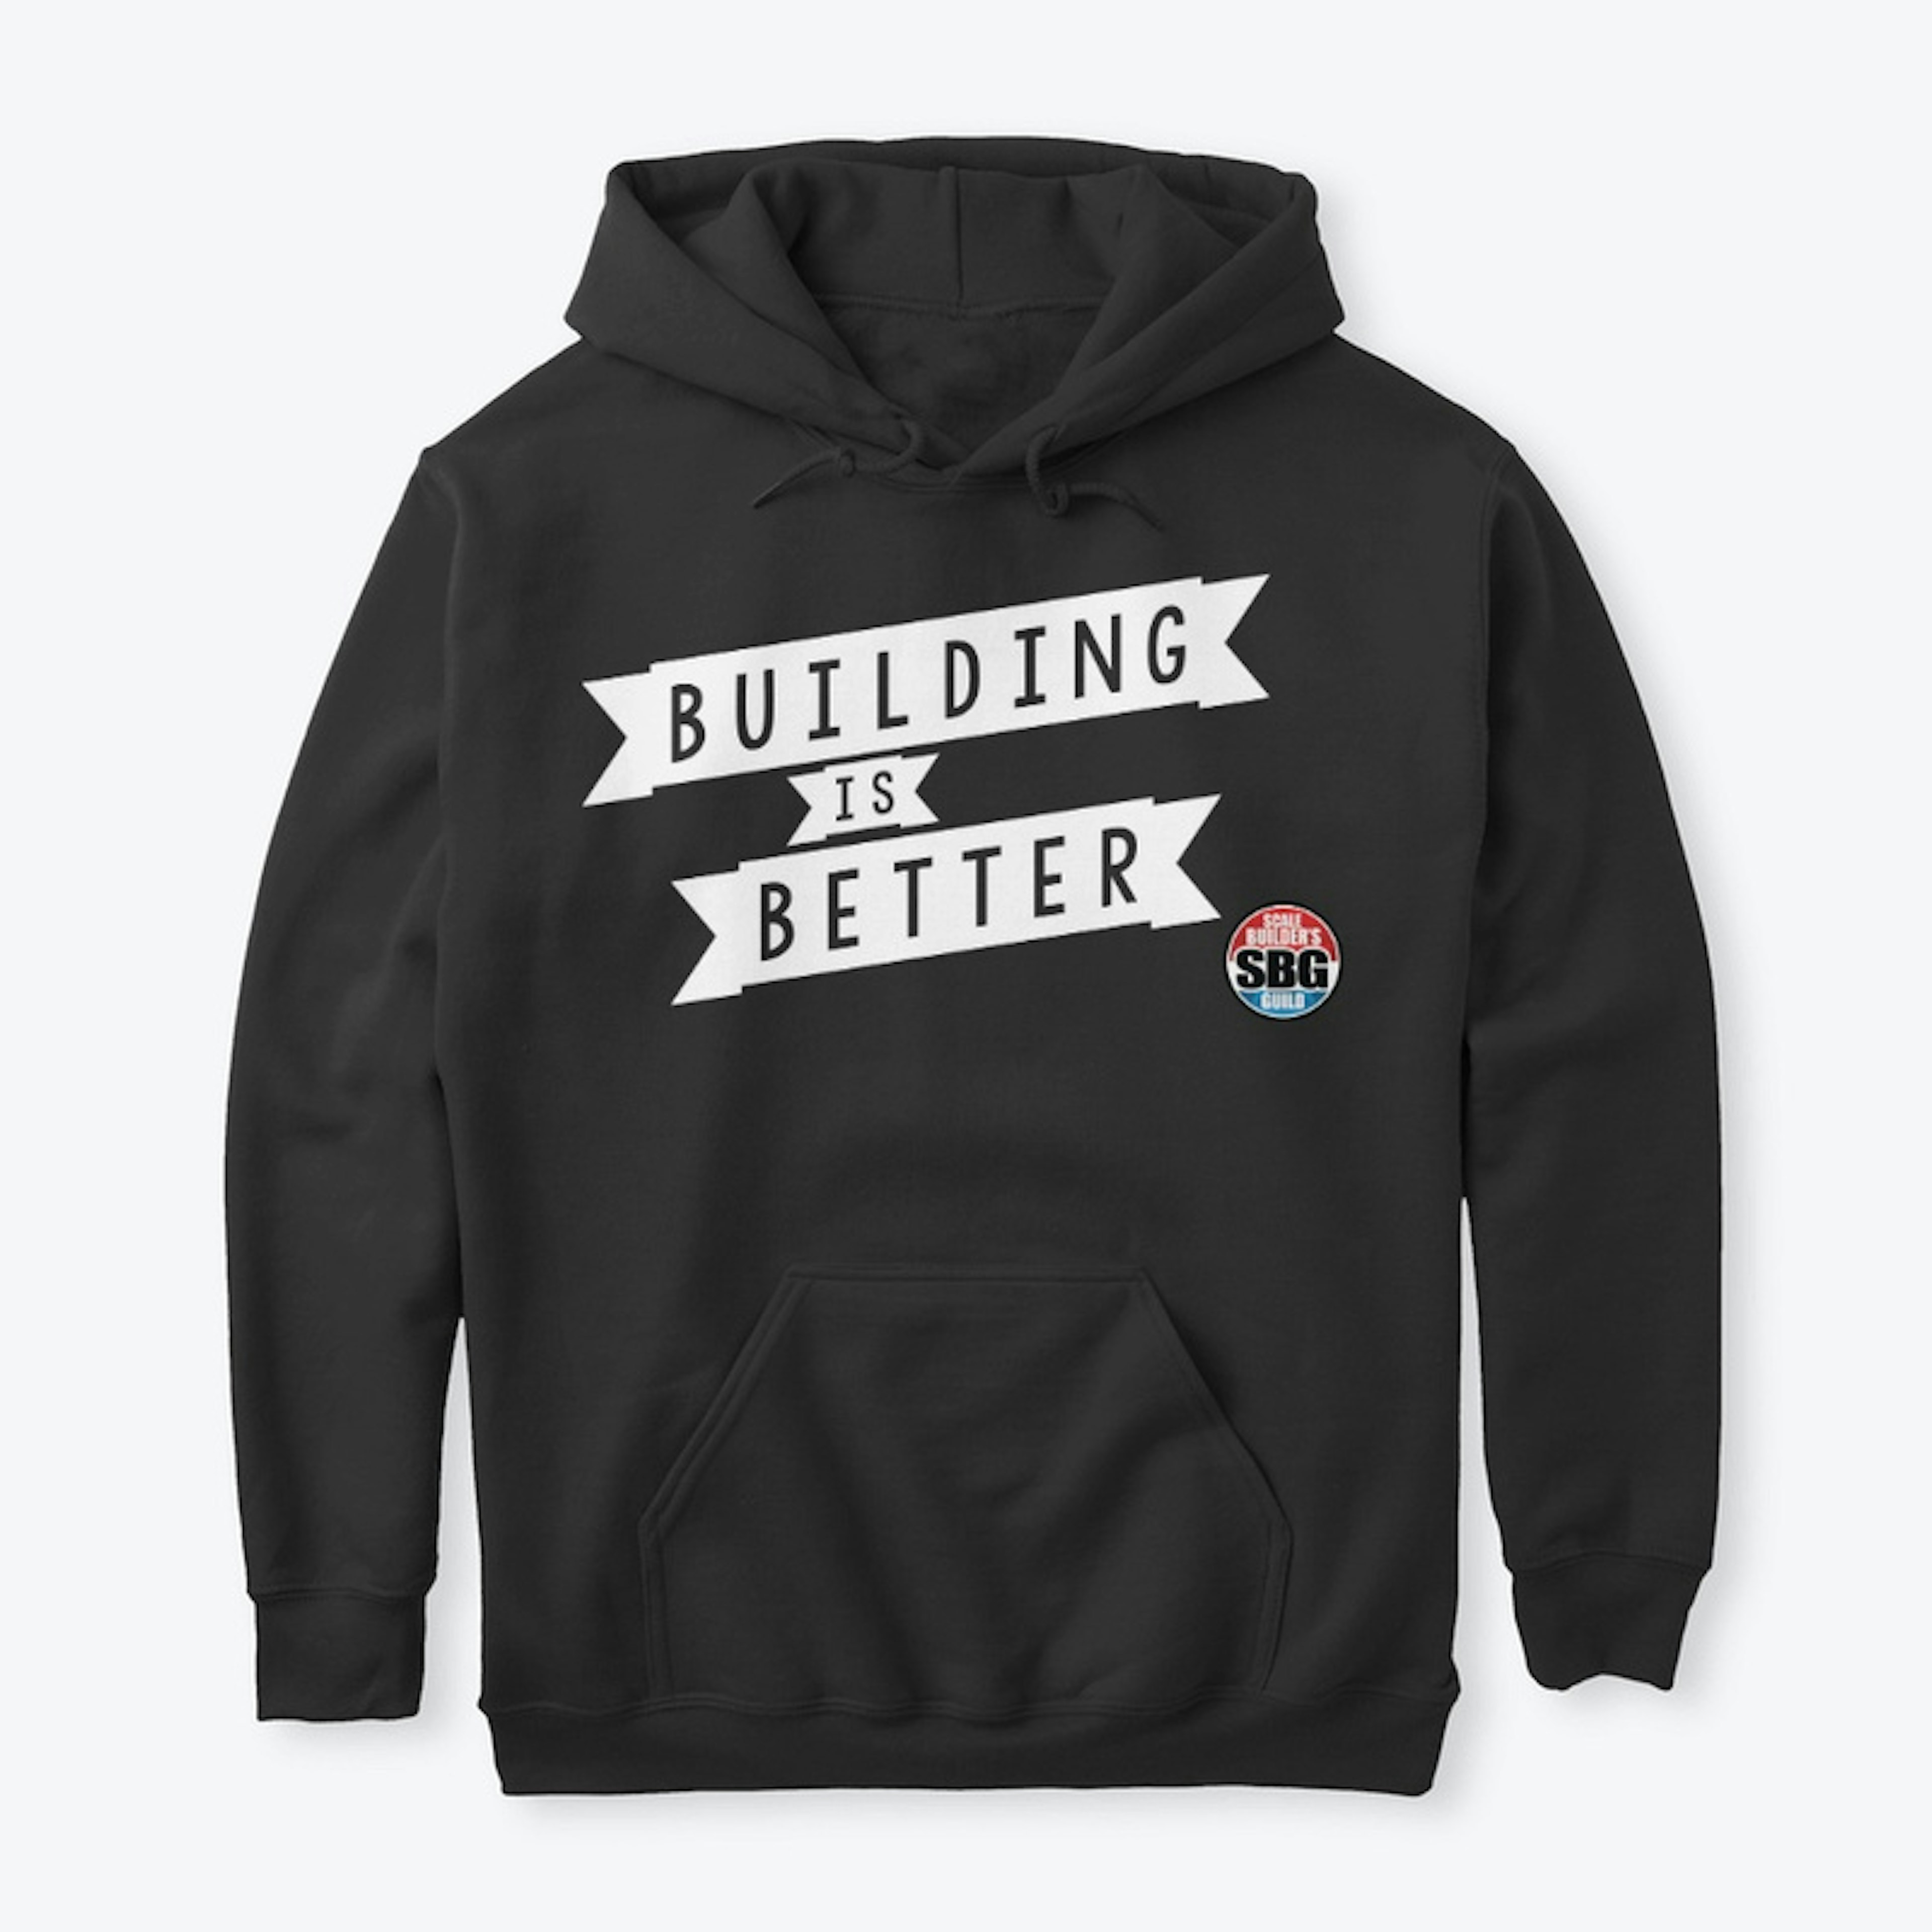 Building is Better!